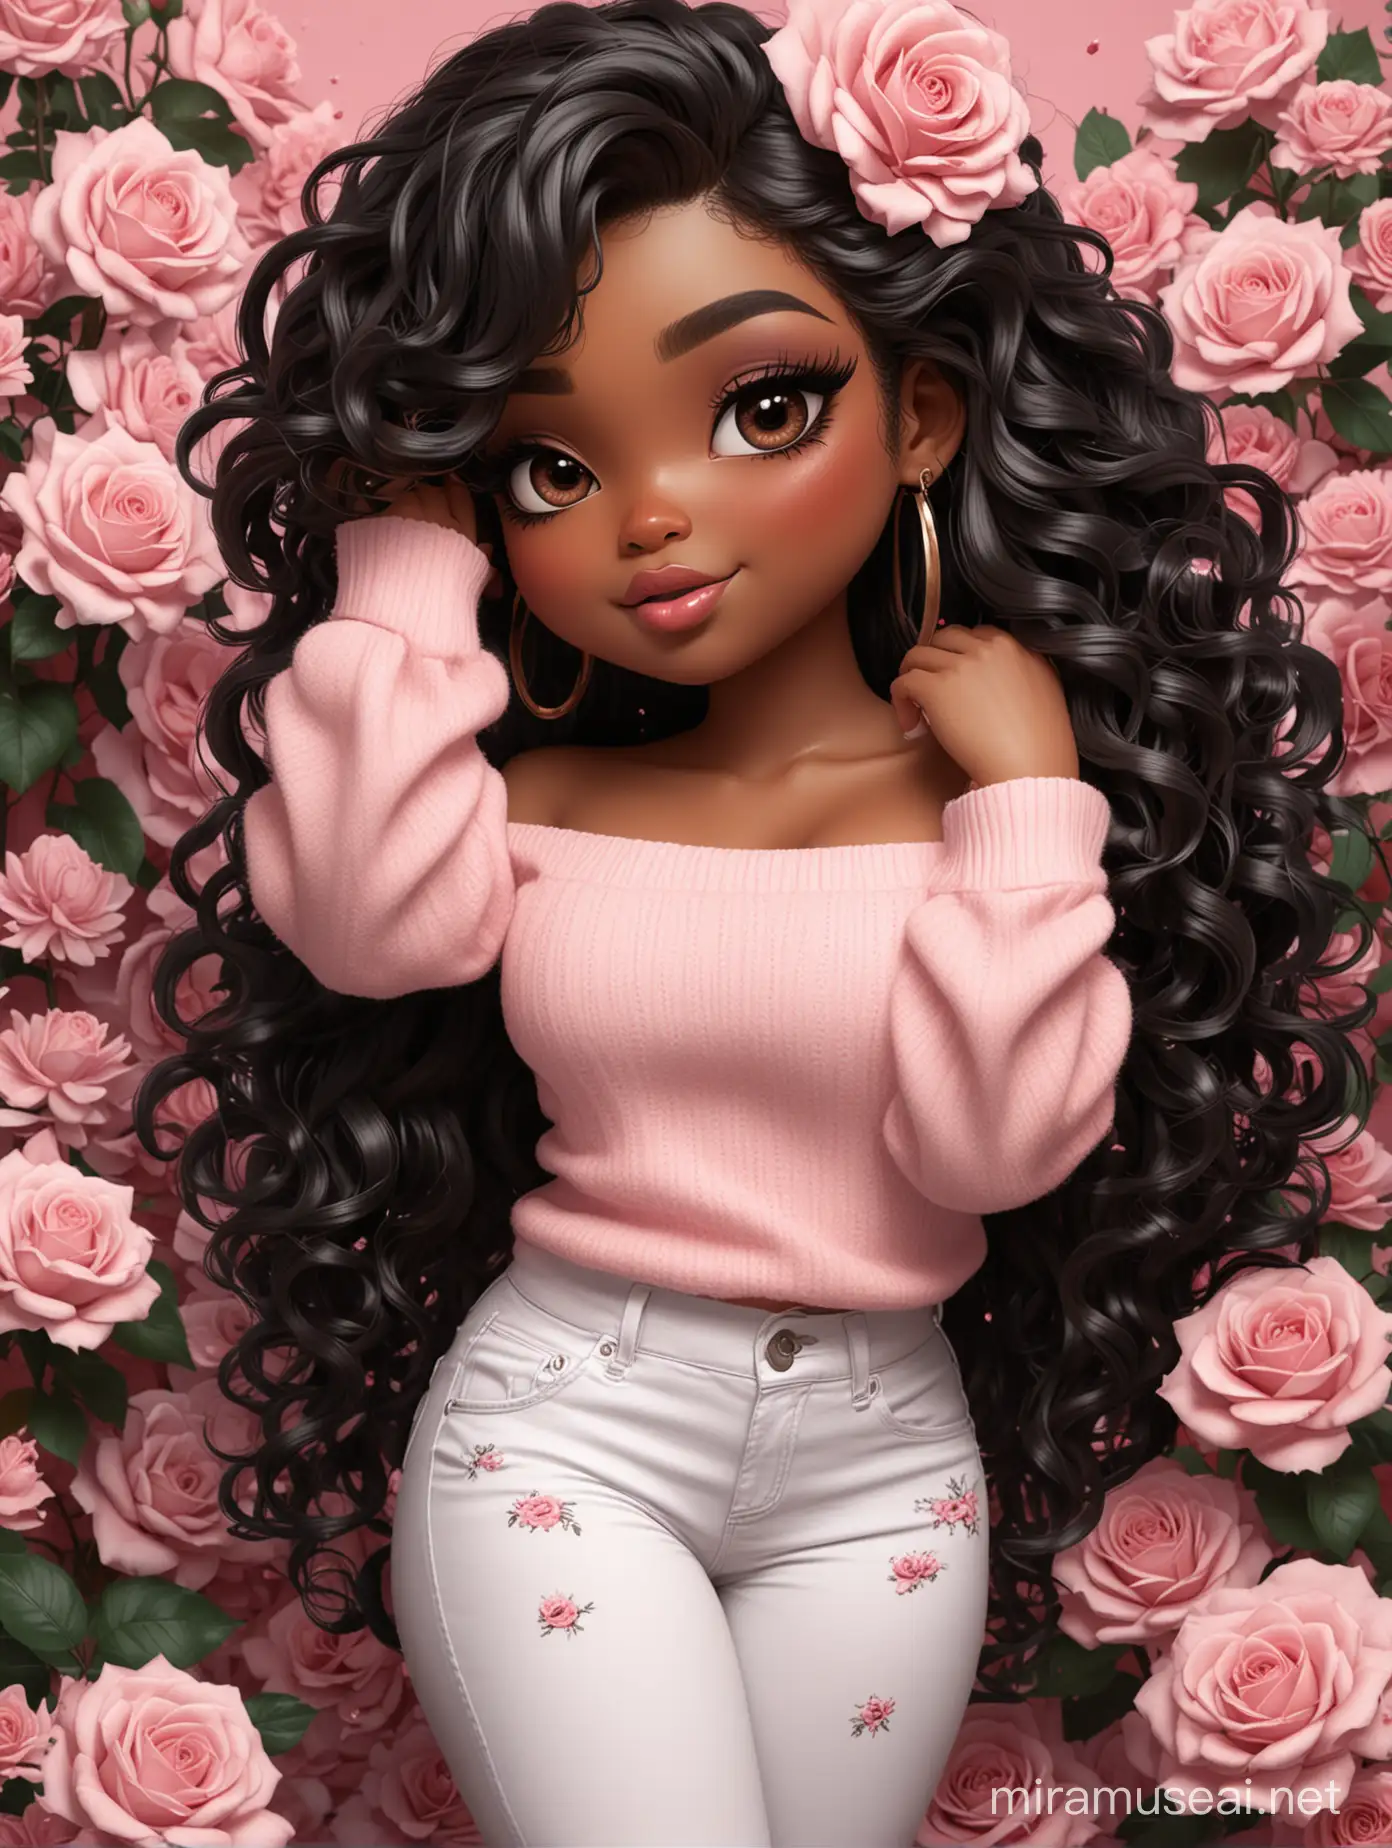 Expressive Chibi Black Woman in Rose Pink Sweater and White Jeans amidst Floral Abundance